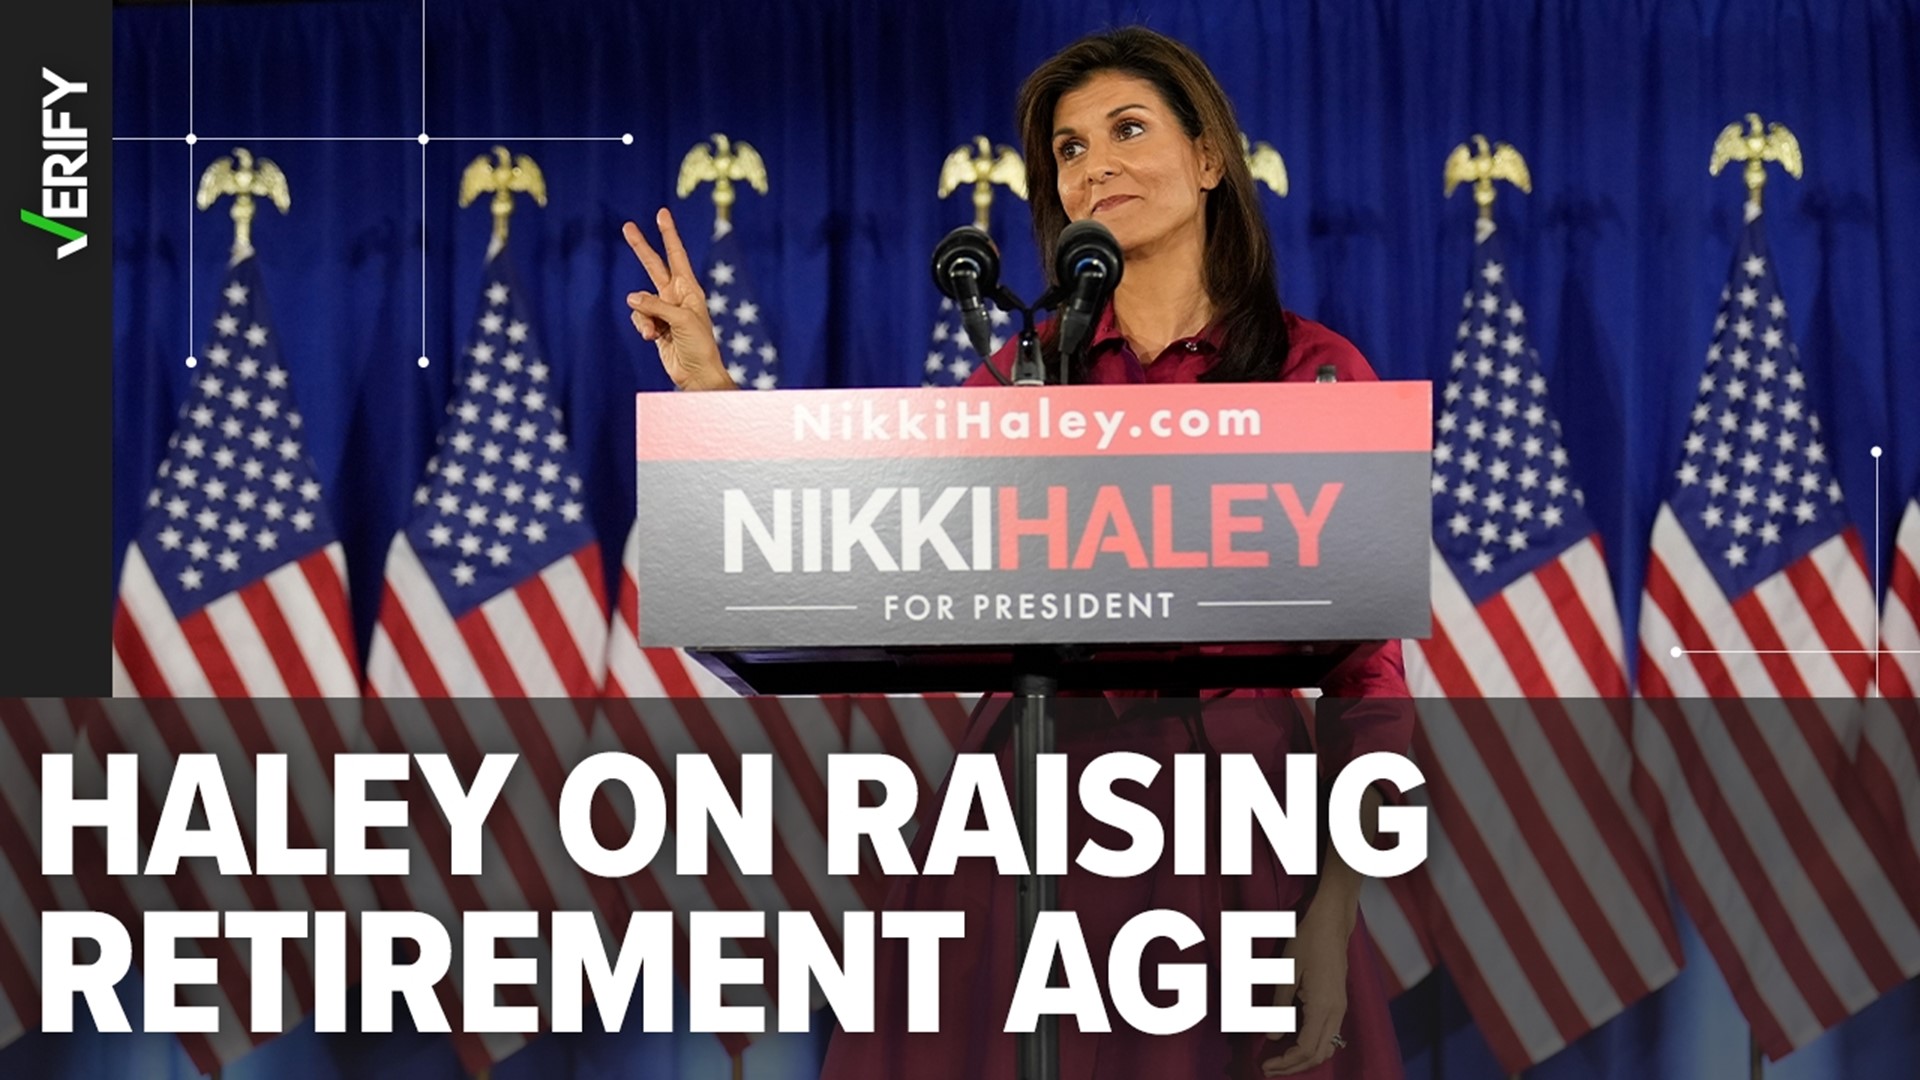 Has Nikki Haley said the current retirement age is too low and should be increased above 65 to 74 or 75? VERIFY fact-checked her record.